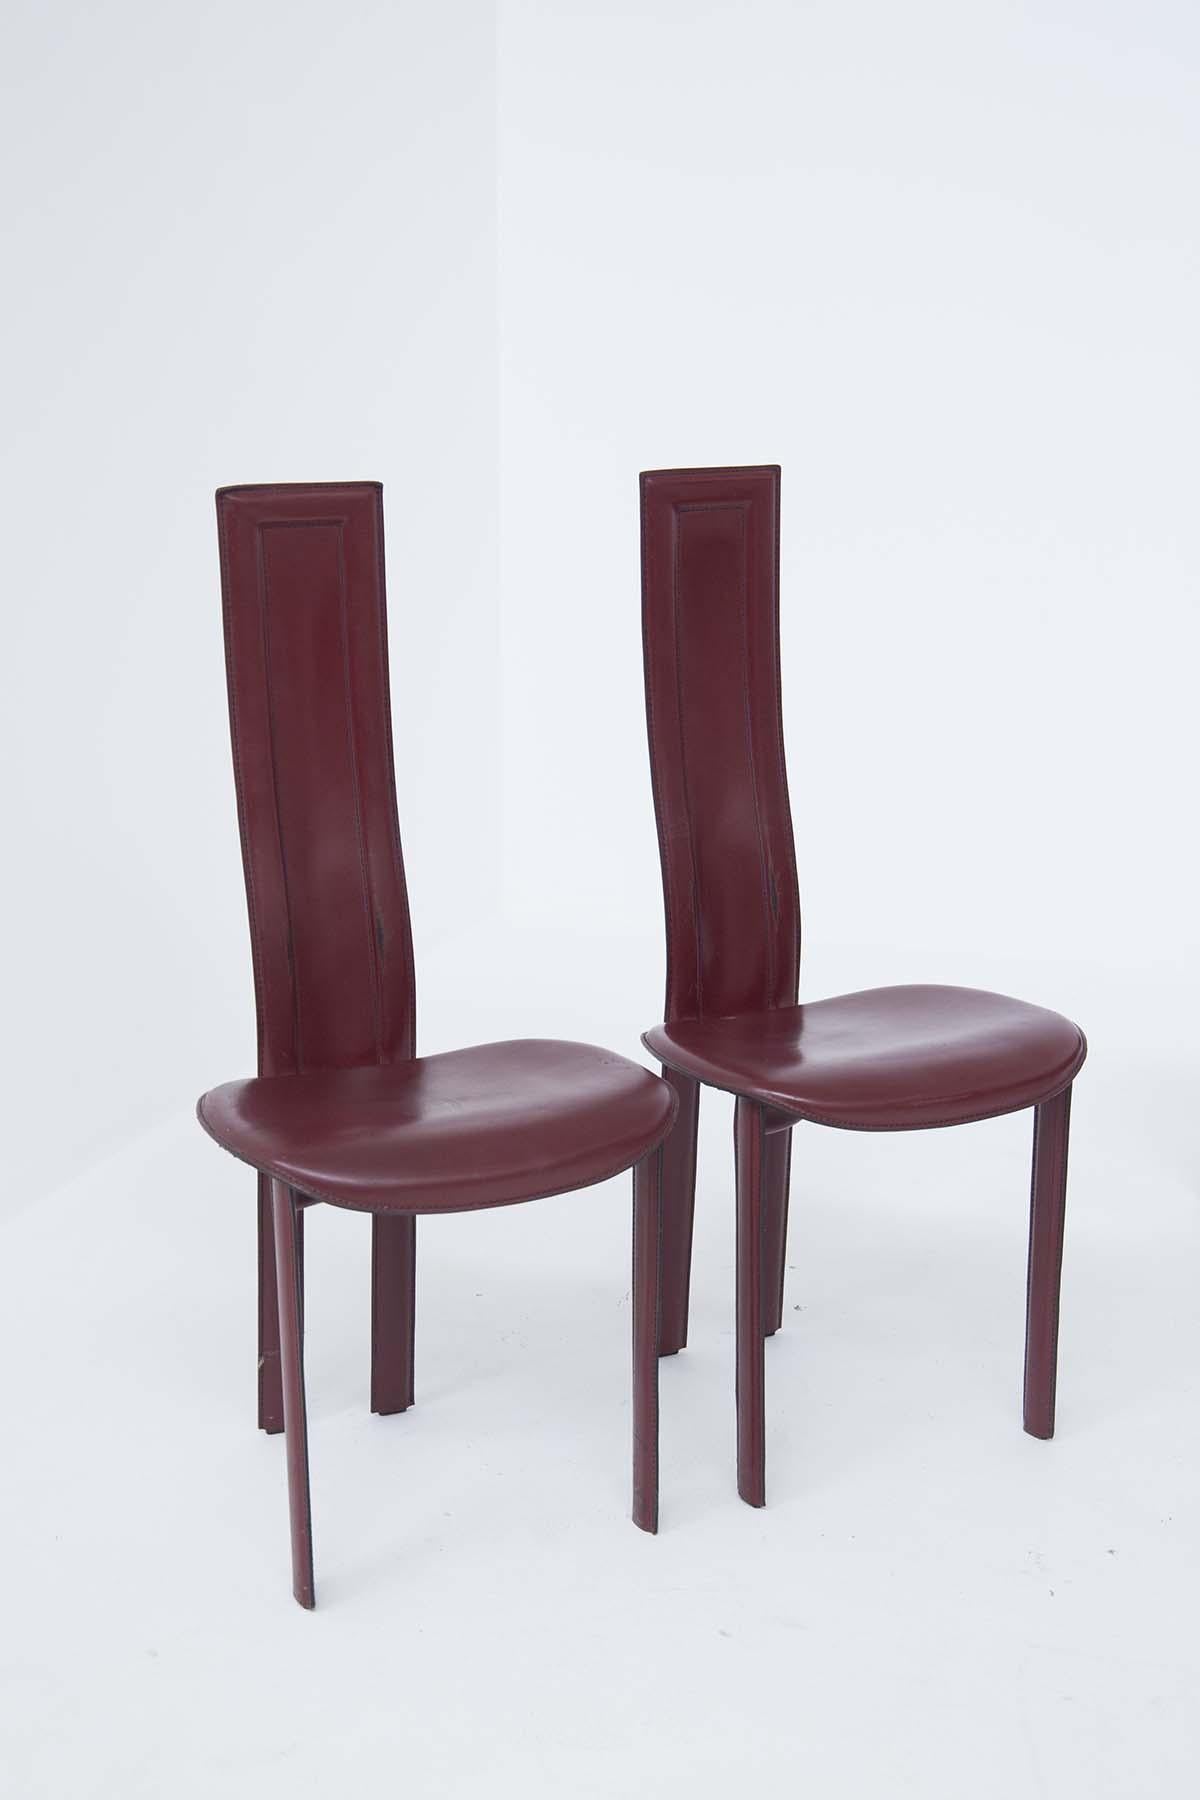 Set of 6 table chairs in burgundy leather with visible stitching, four are for the side of the table, two are the head chairs, with a higher and longer back, their seat is rounded.
All the vintage leather chairs have the original label under the